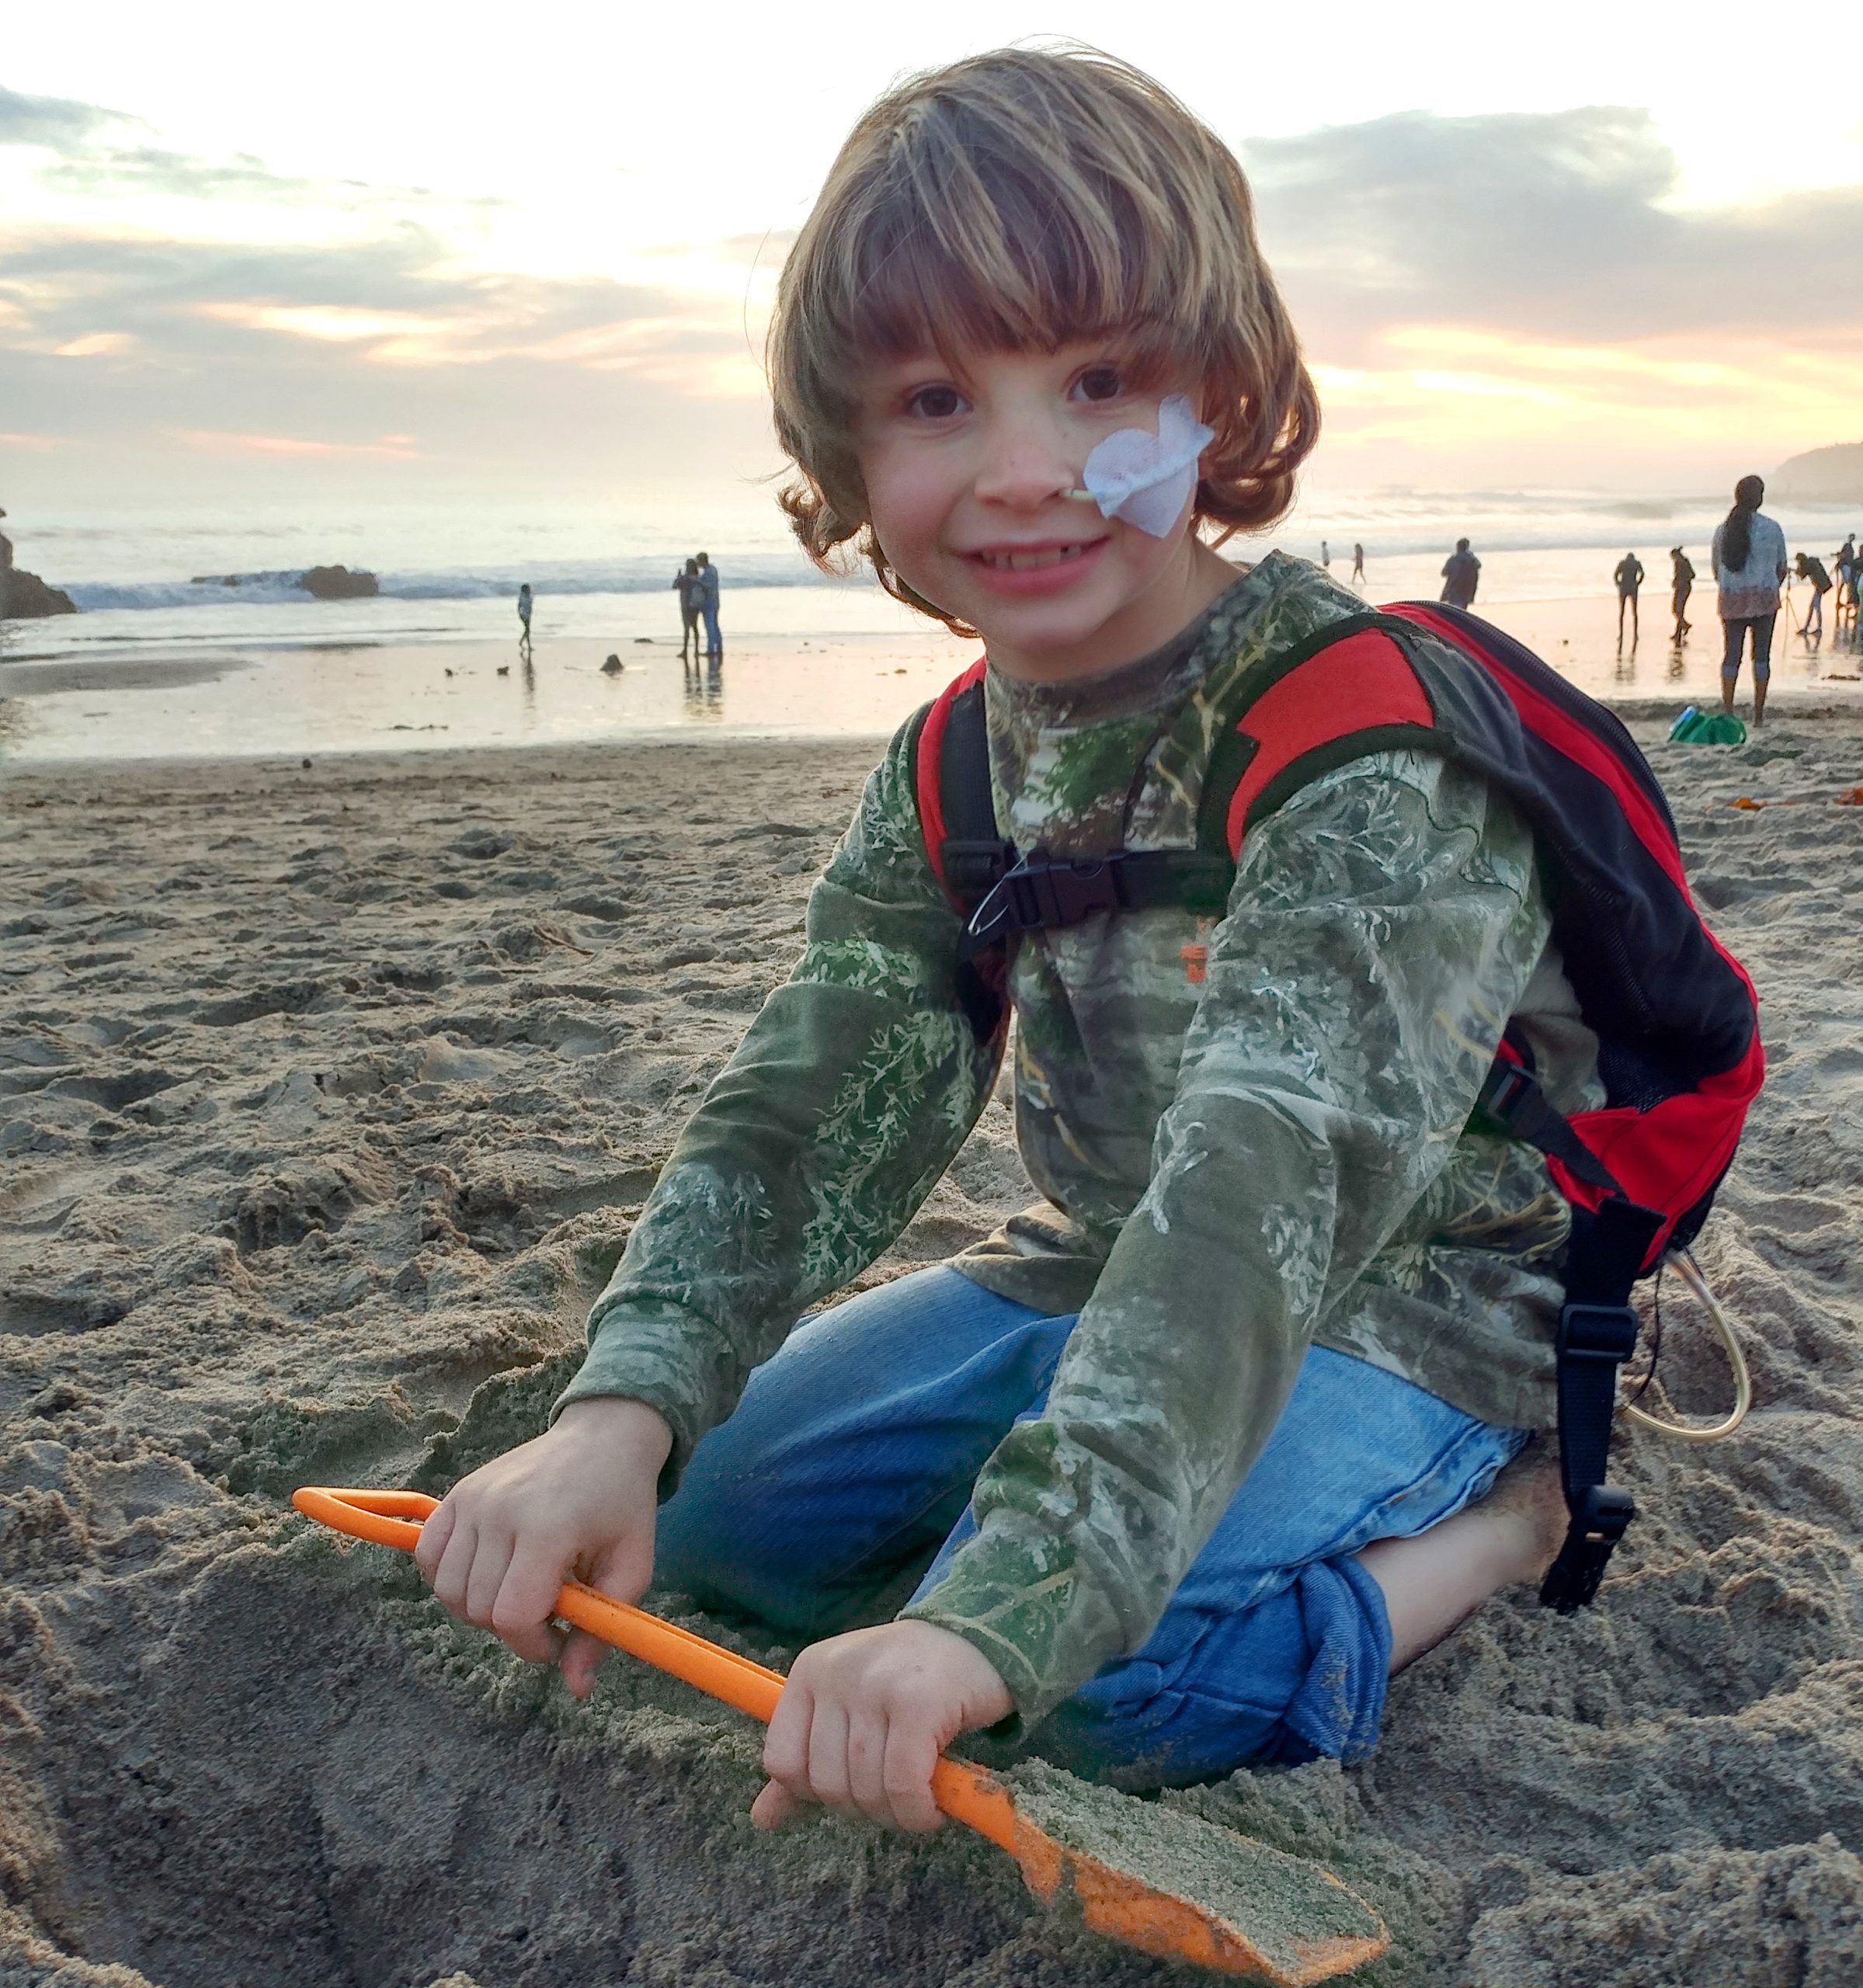 Gage with his VAD on the beach.